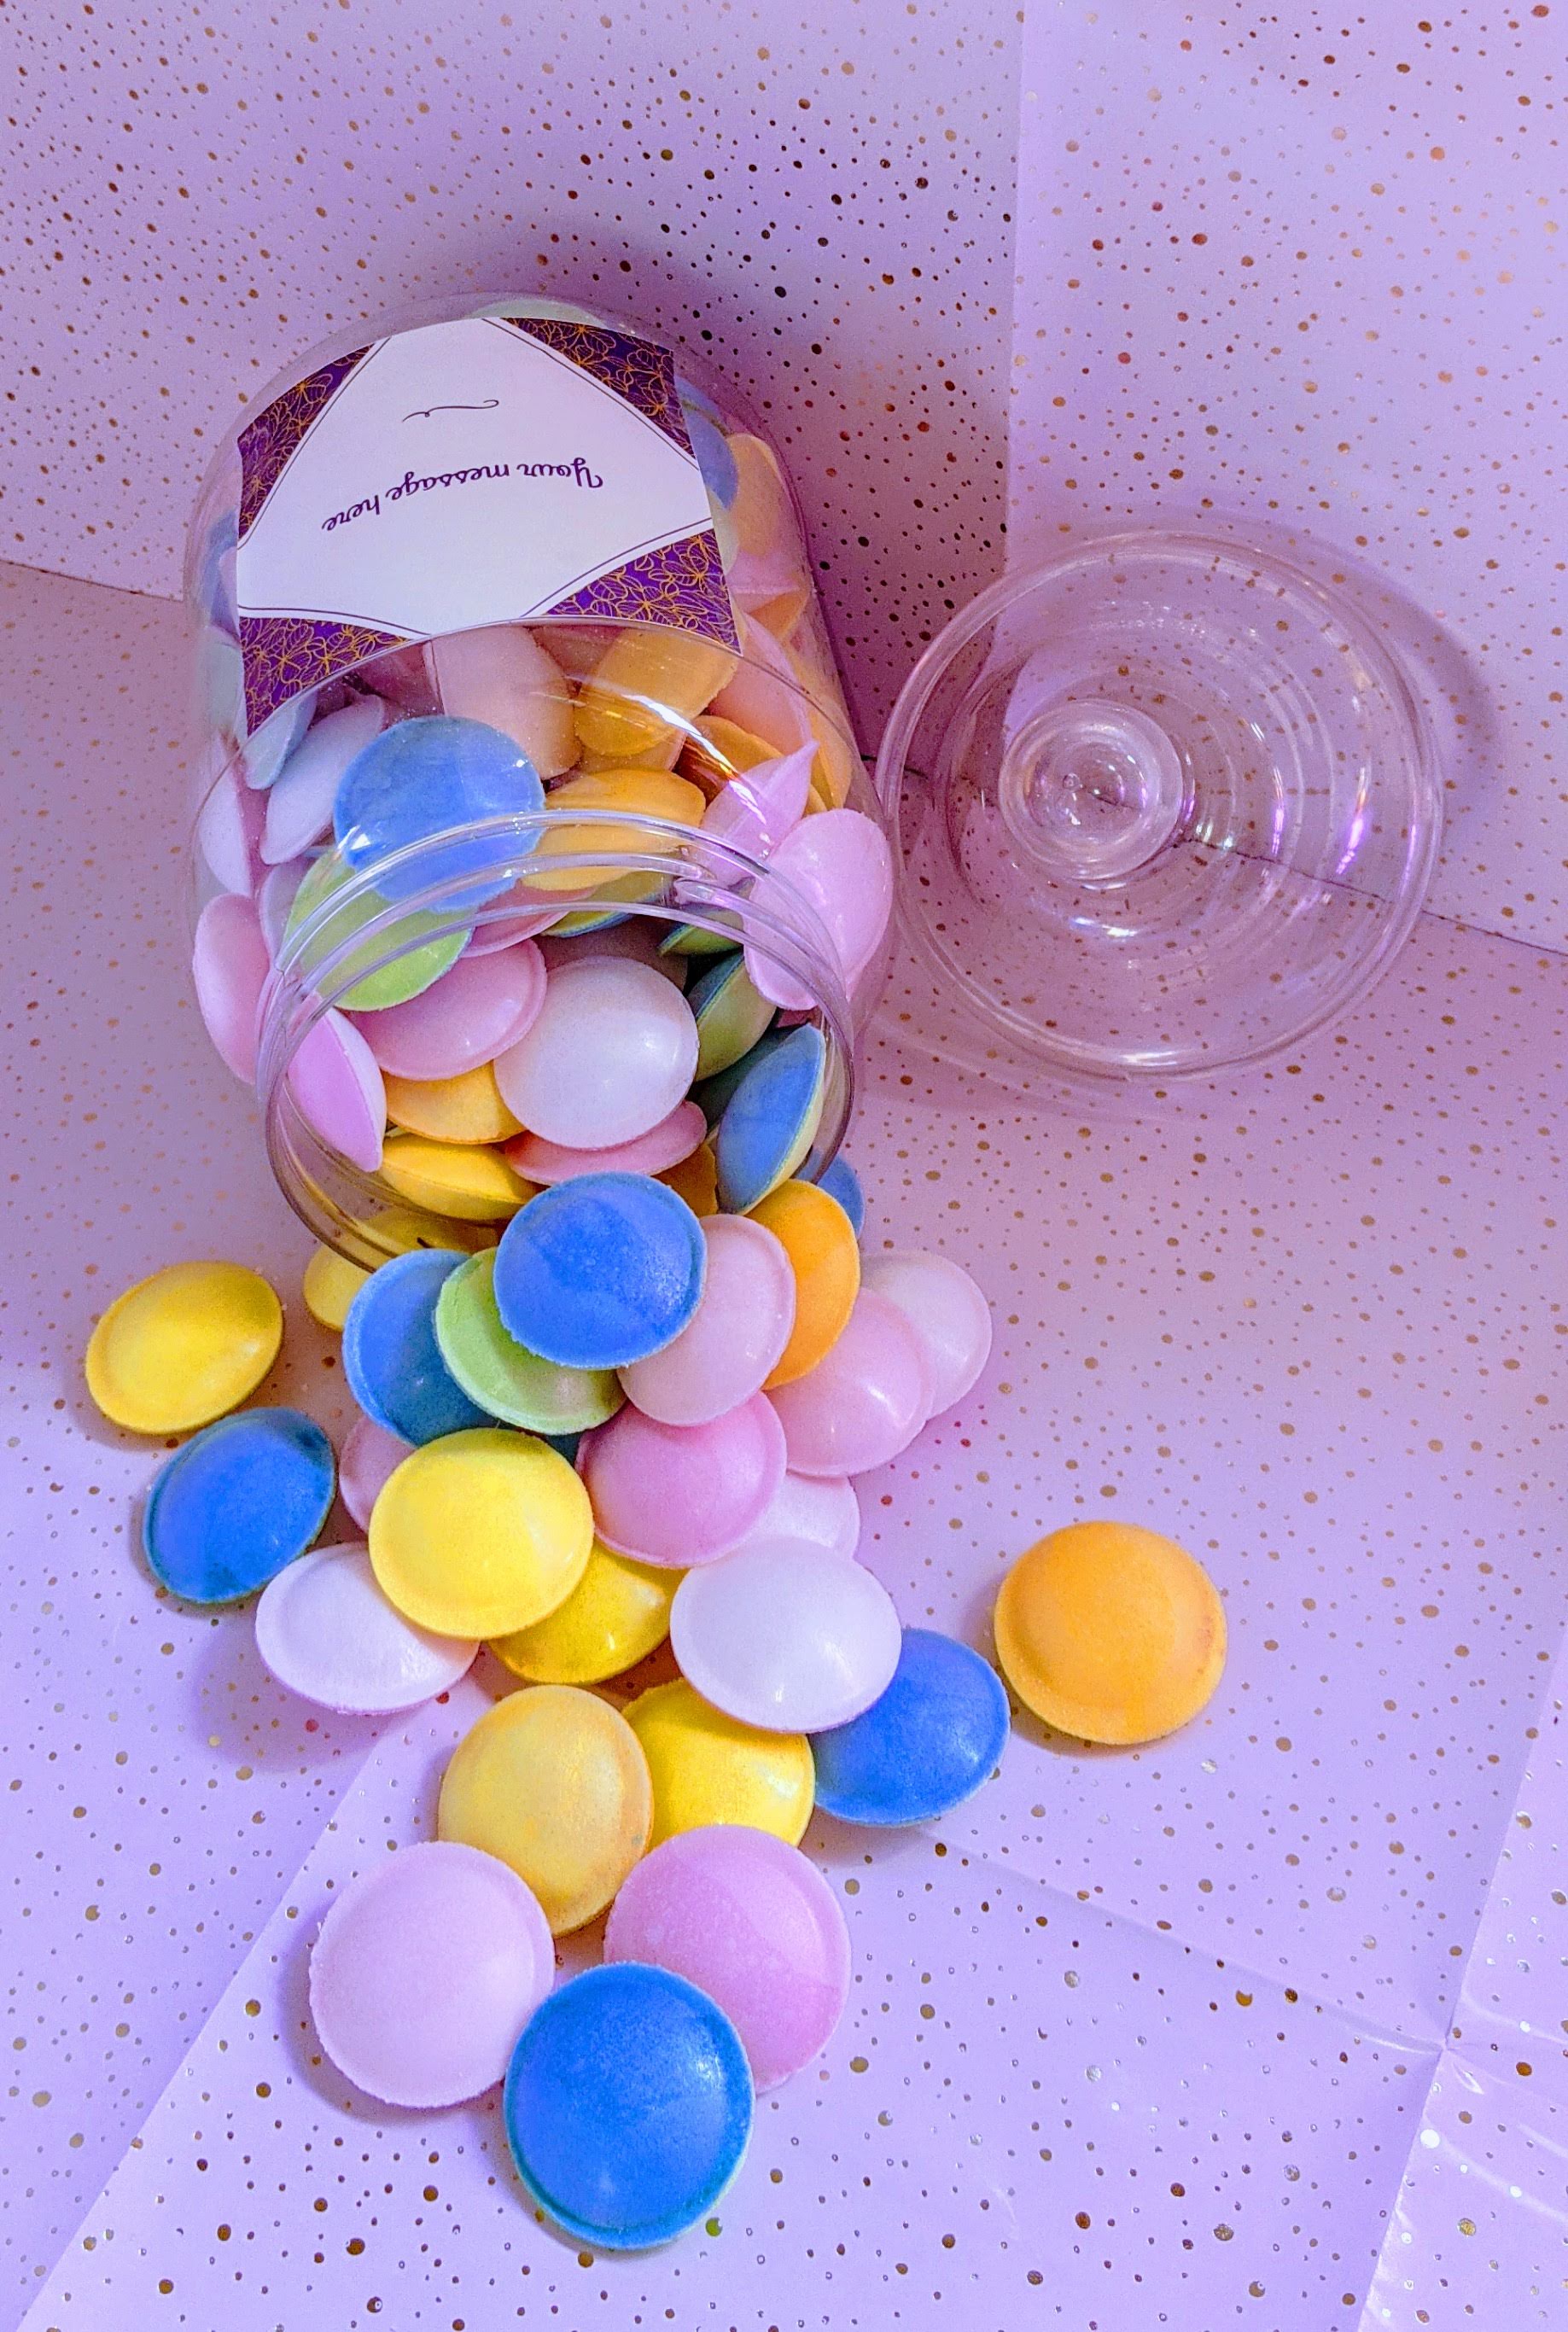 tasty Flying Saucers Sweets in UK